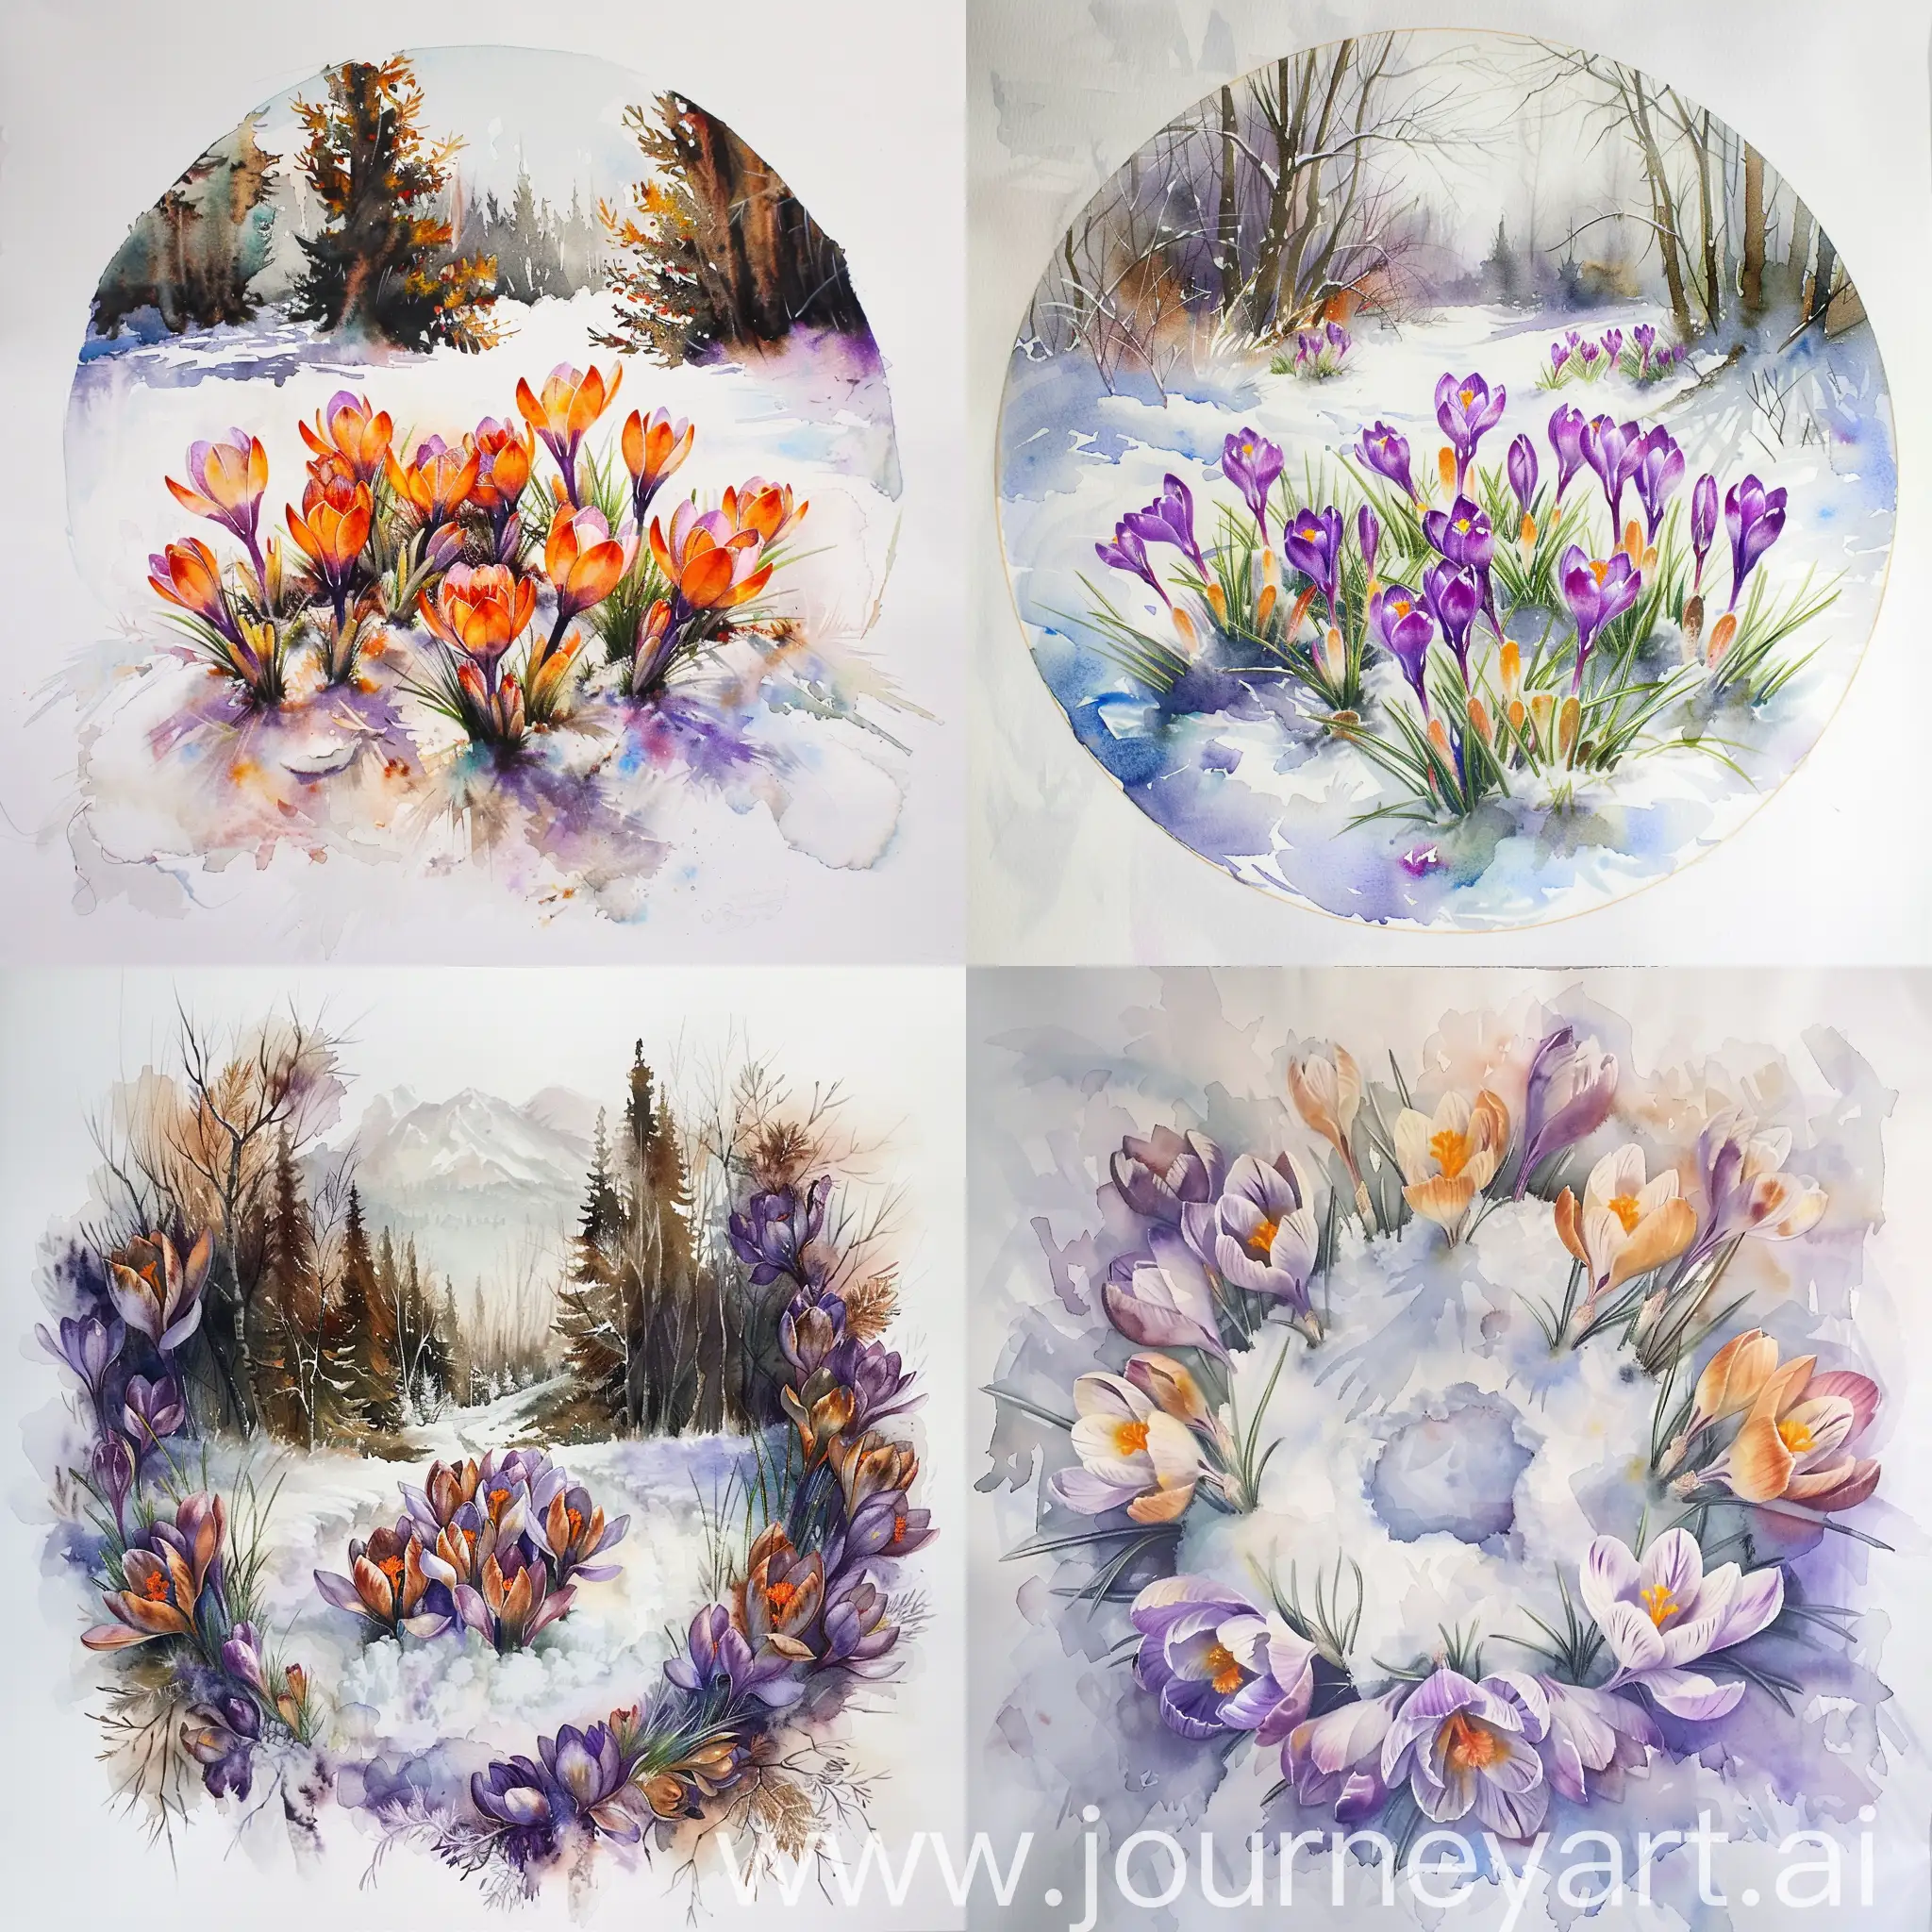 Vibrant-Crocuses-in-Snow-Classical-Watercolor-Painting-by-Elena-Bazanova